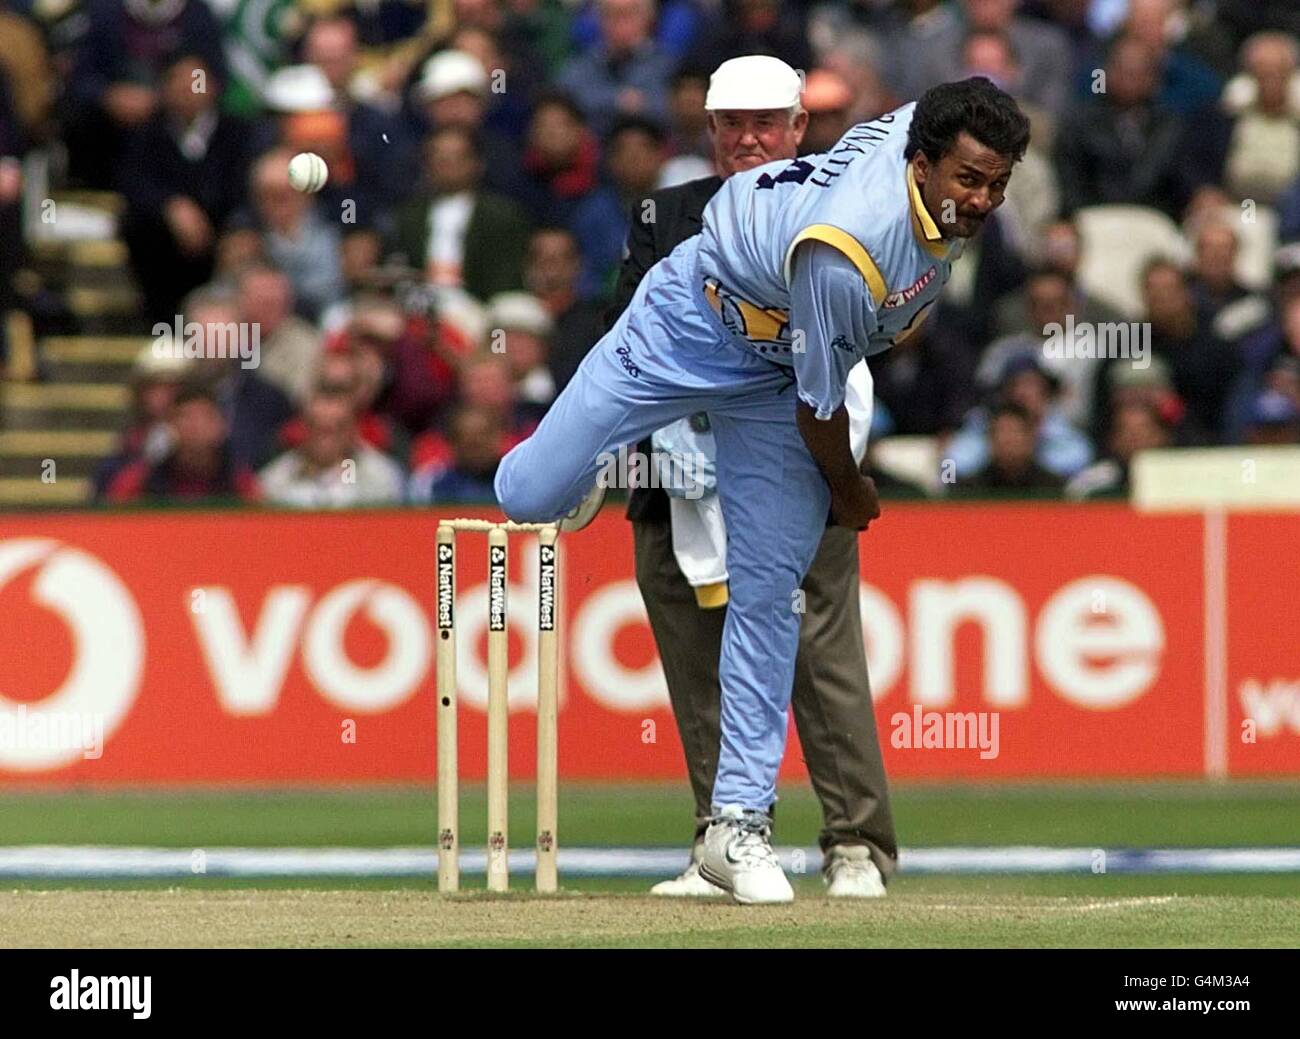 Indian fast bowler Javagal Srinath delivers a ball, during their Super Six Cricket World Cup match against Pakistan at Old Trafford, Manchester. Stock Photo